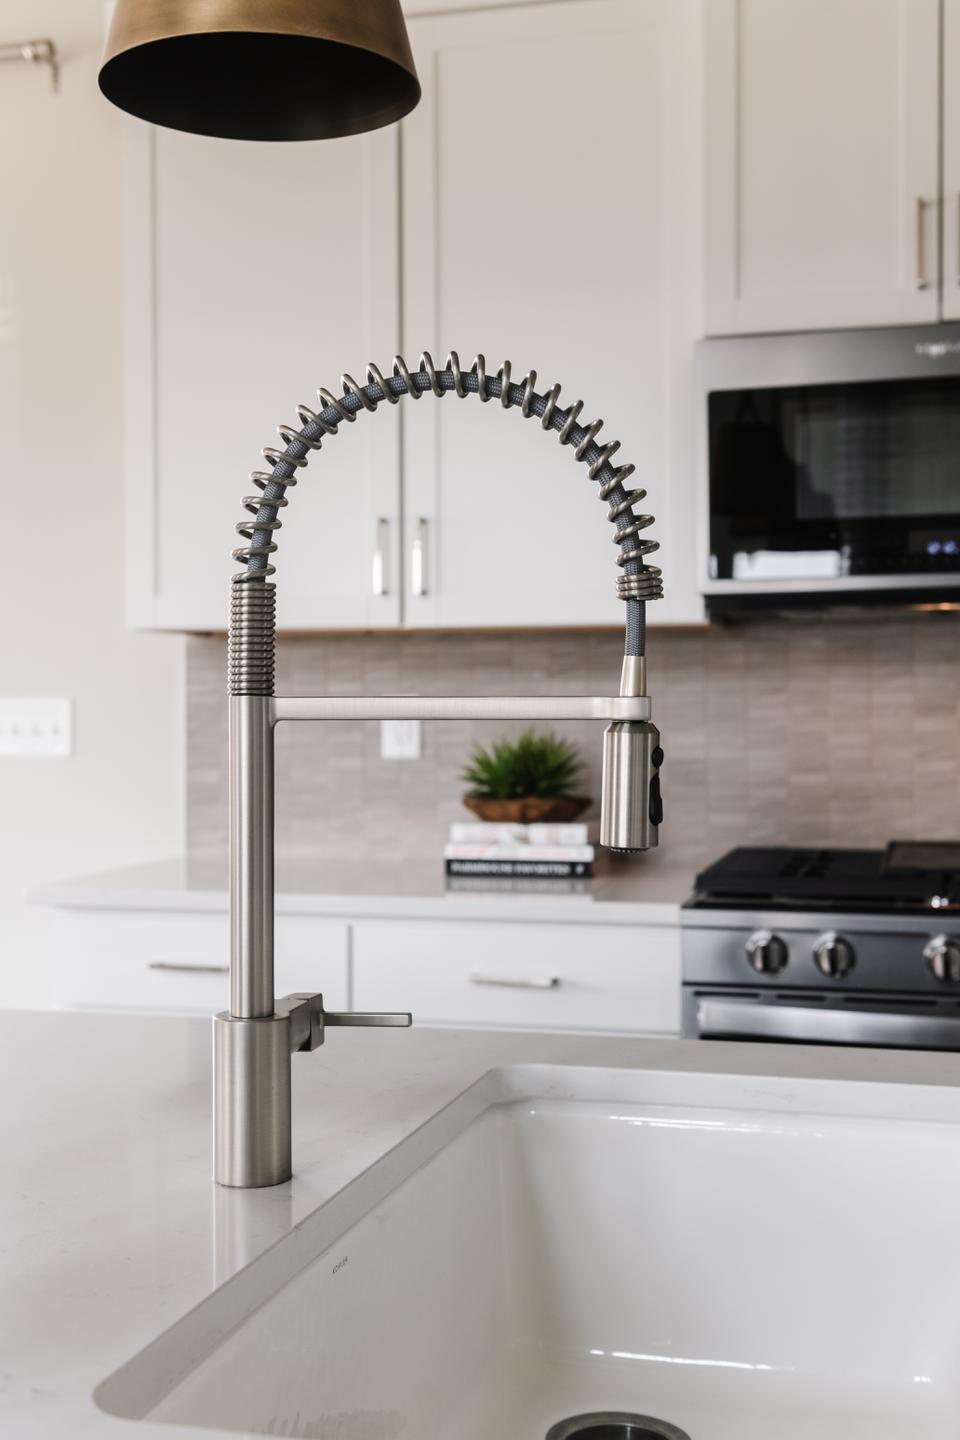 Top 4 Innovative Plumbing Fixtures to Add to Your Home